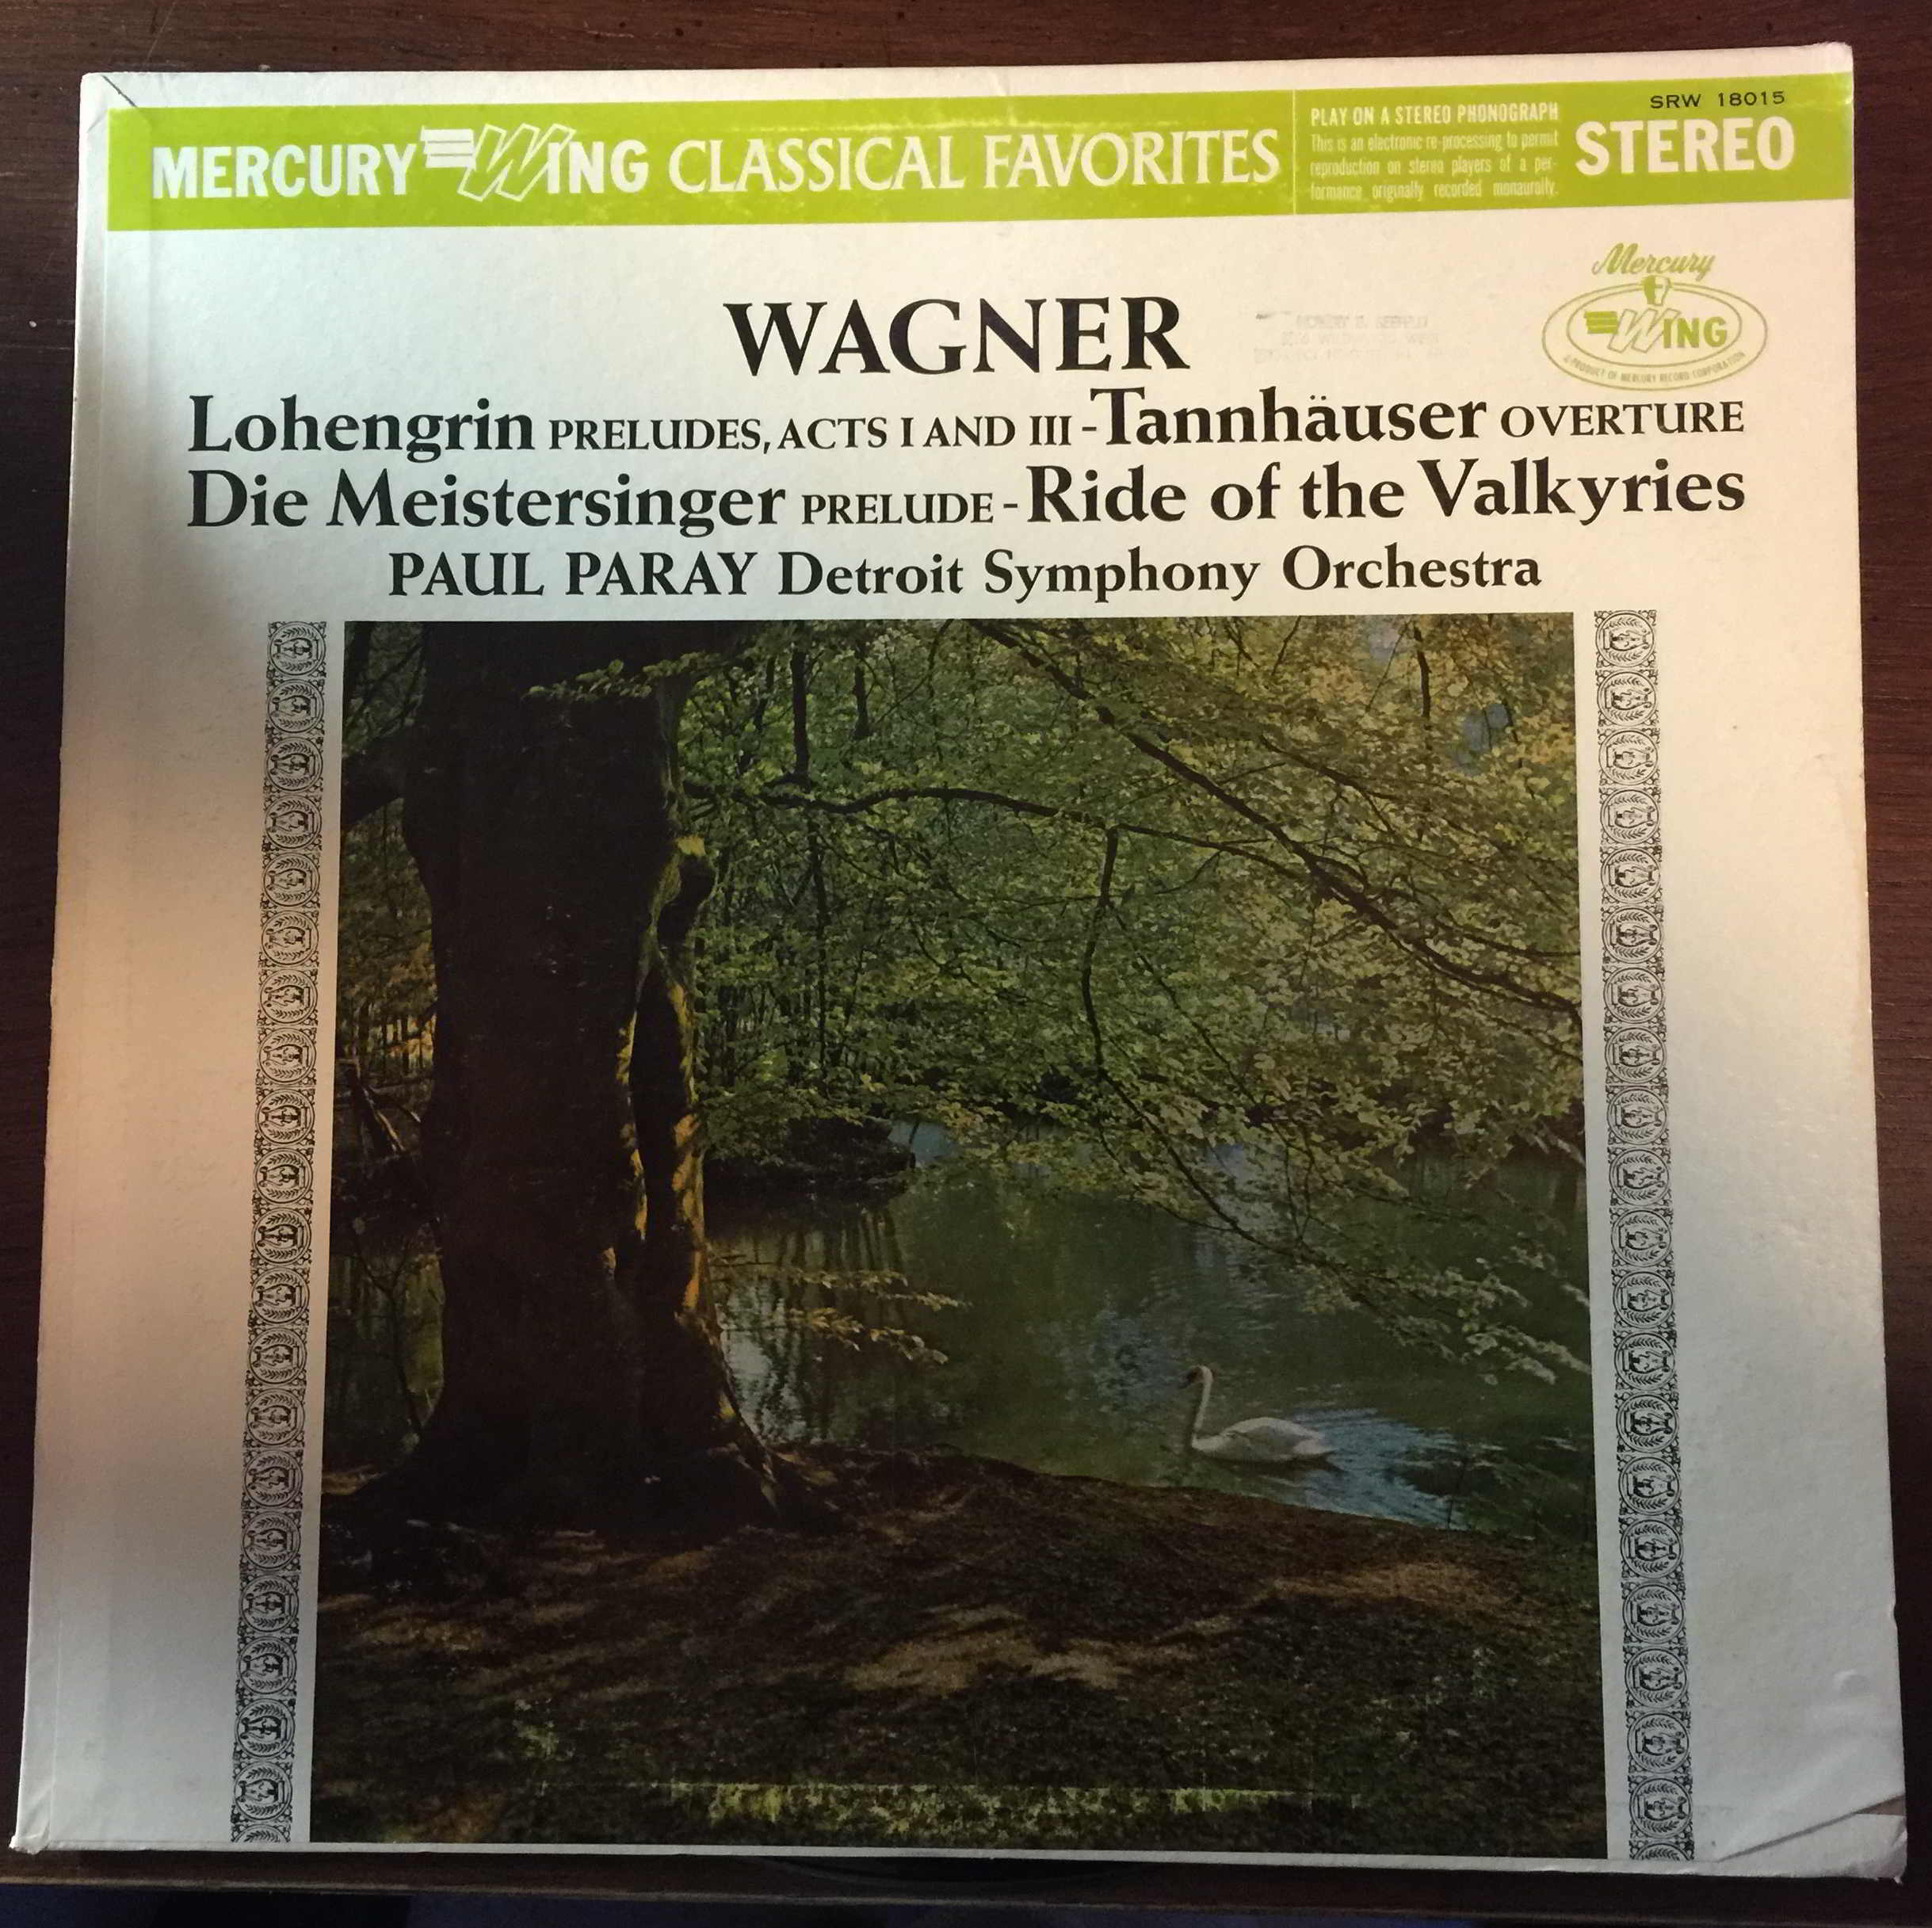 Wagner: Lohengrin (Preludes to Act 1 and Act 3) / Tannhauser (Overture) / Die Meistersinger (Prelude) / The Ride of the Valkyries 